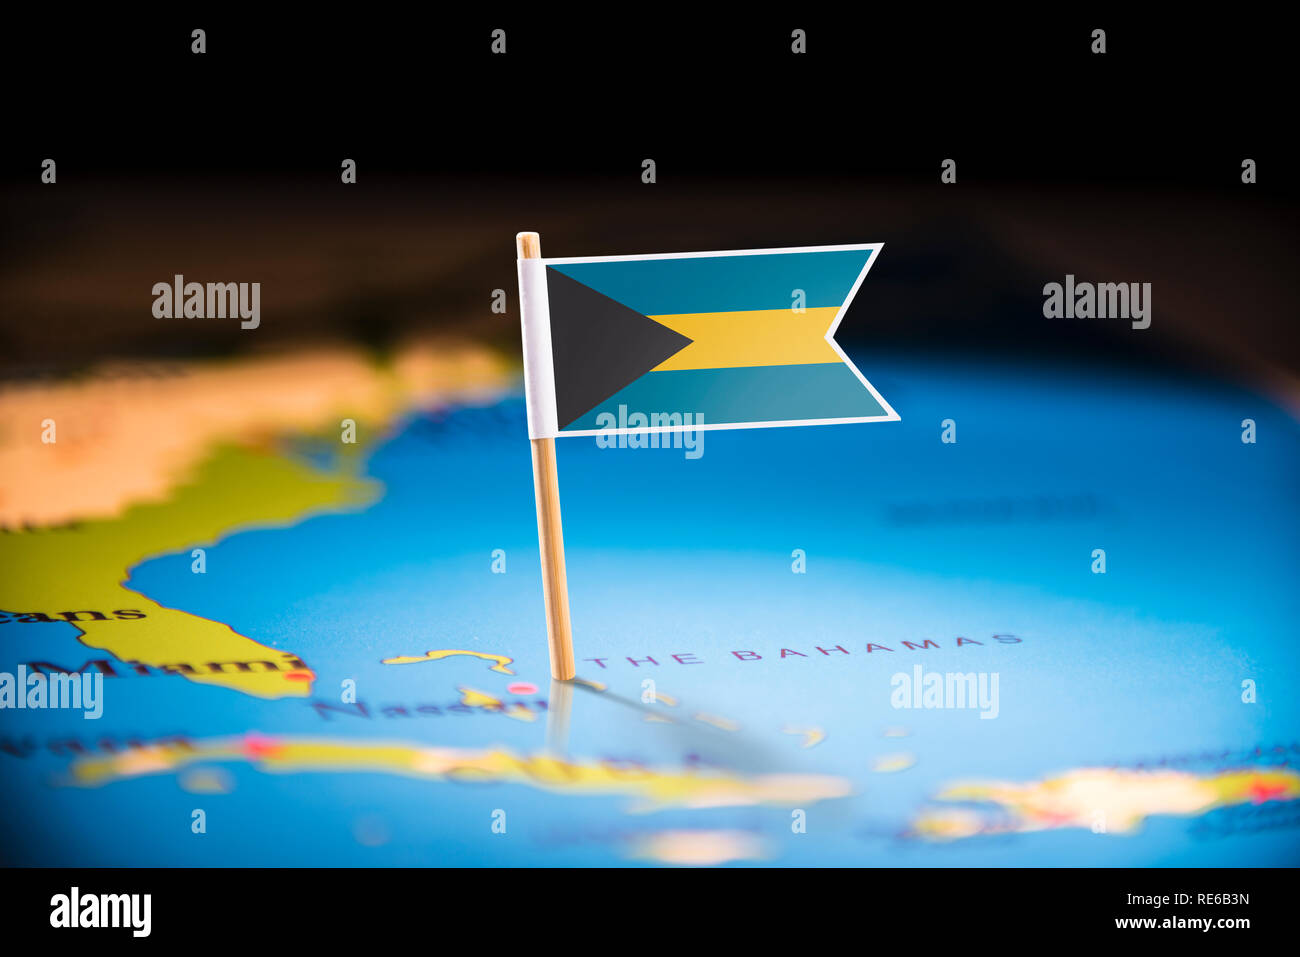 Bahamas marked with a flag on the map Stock Photo